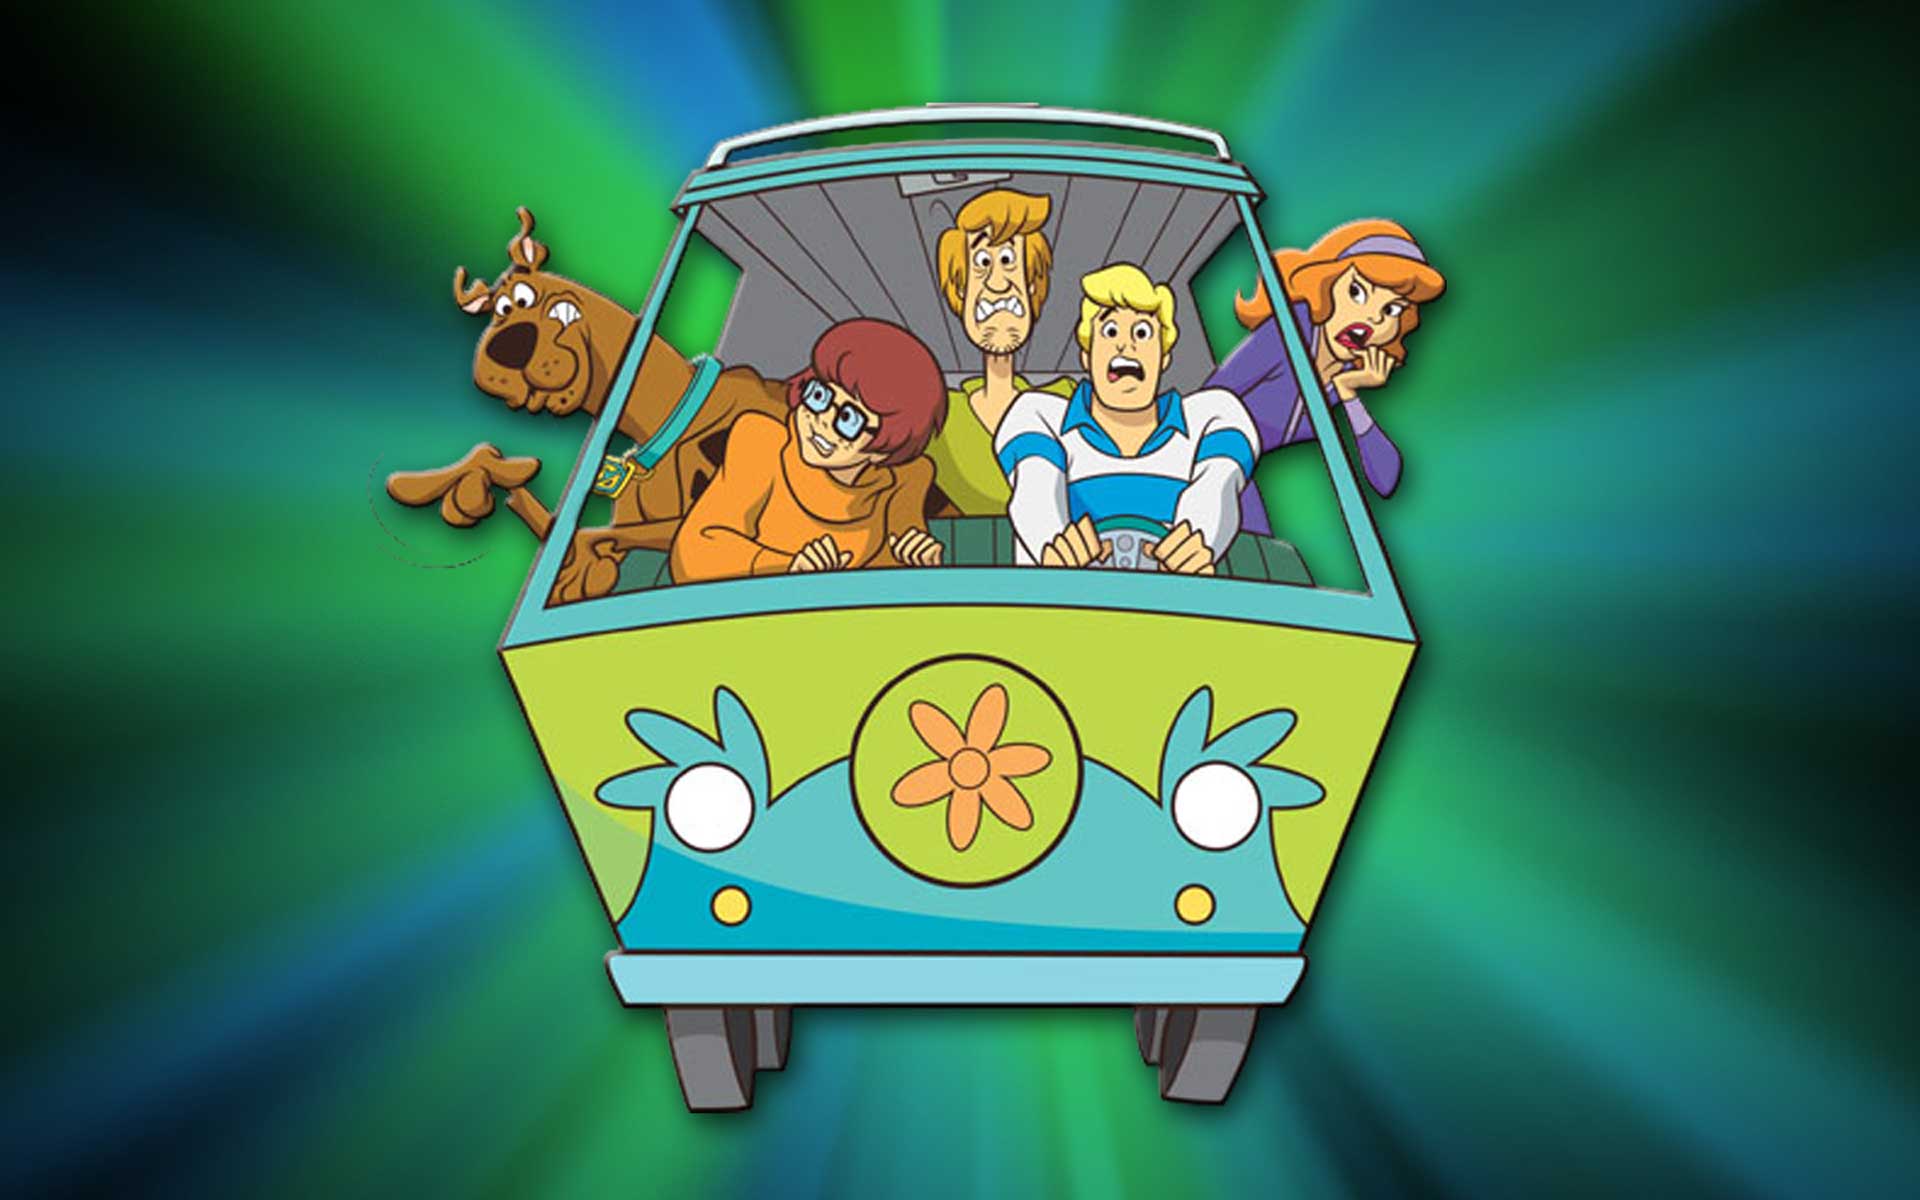 scooby doo background, iPhone Wallpaper, Facebook Cover, Twitter